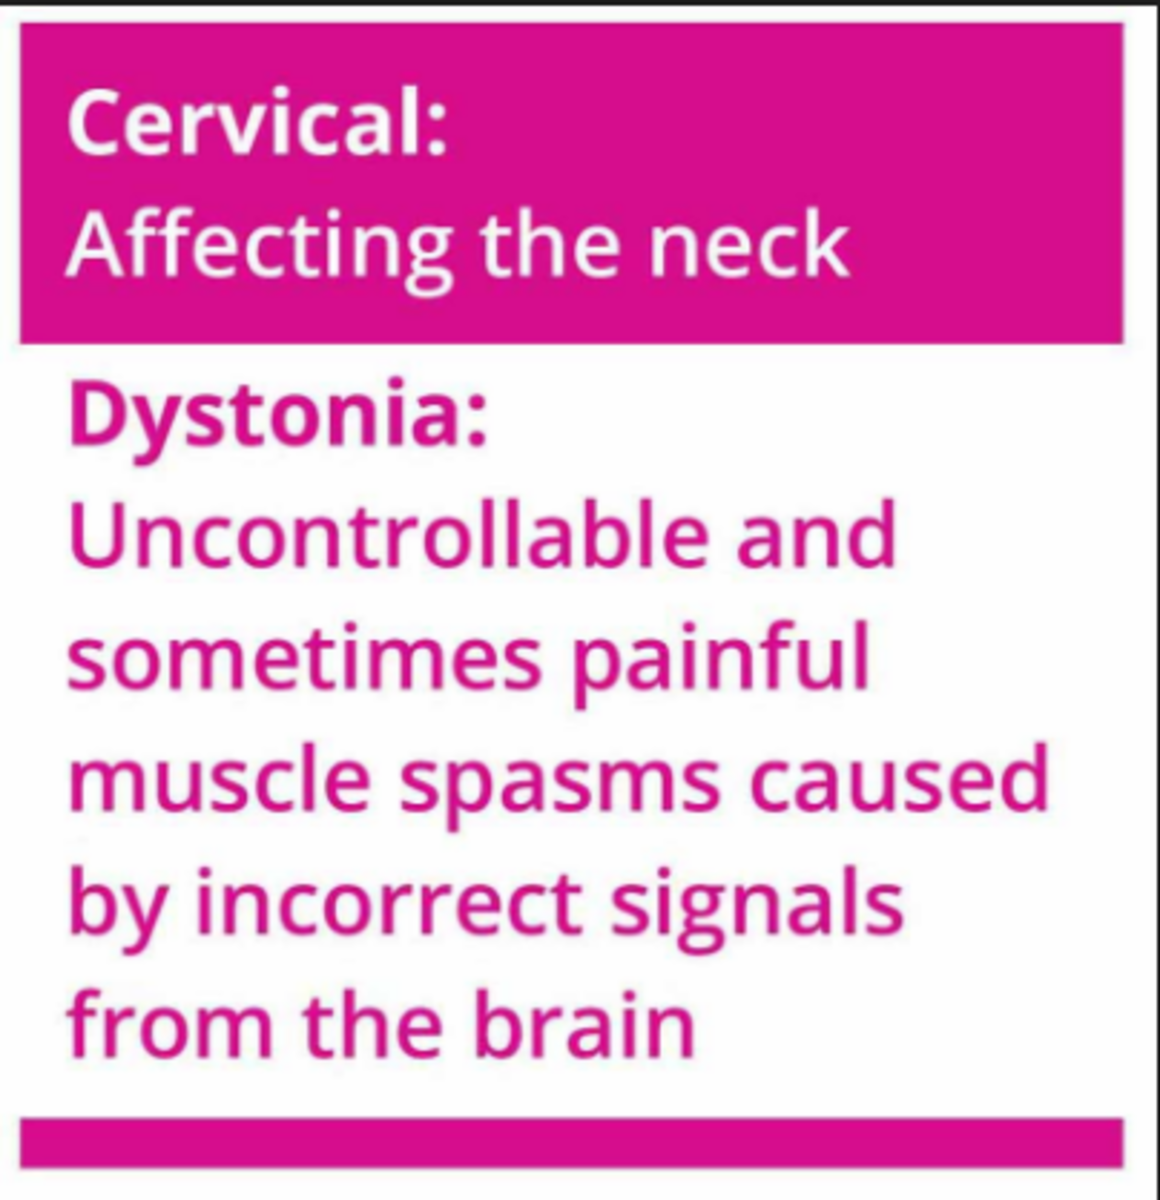 My Experience With Cervical Dystonia